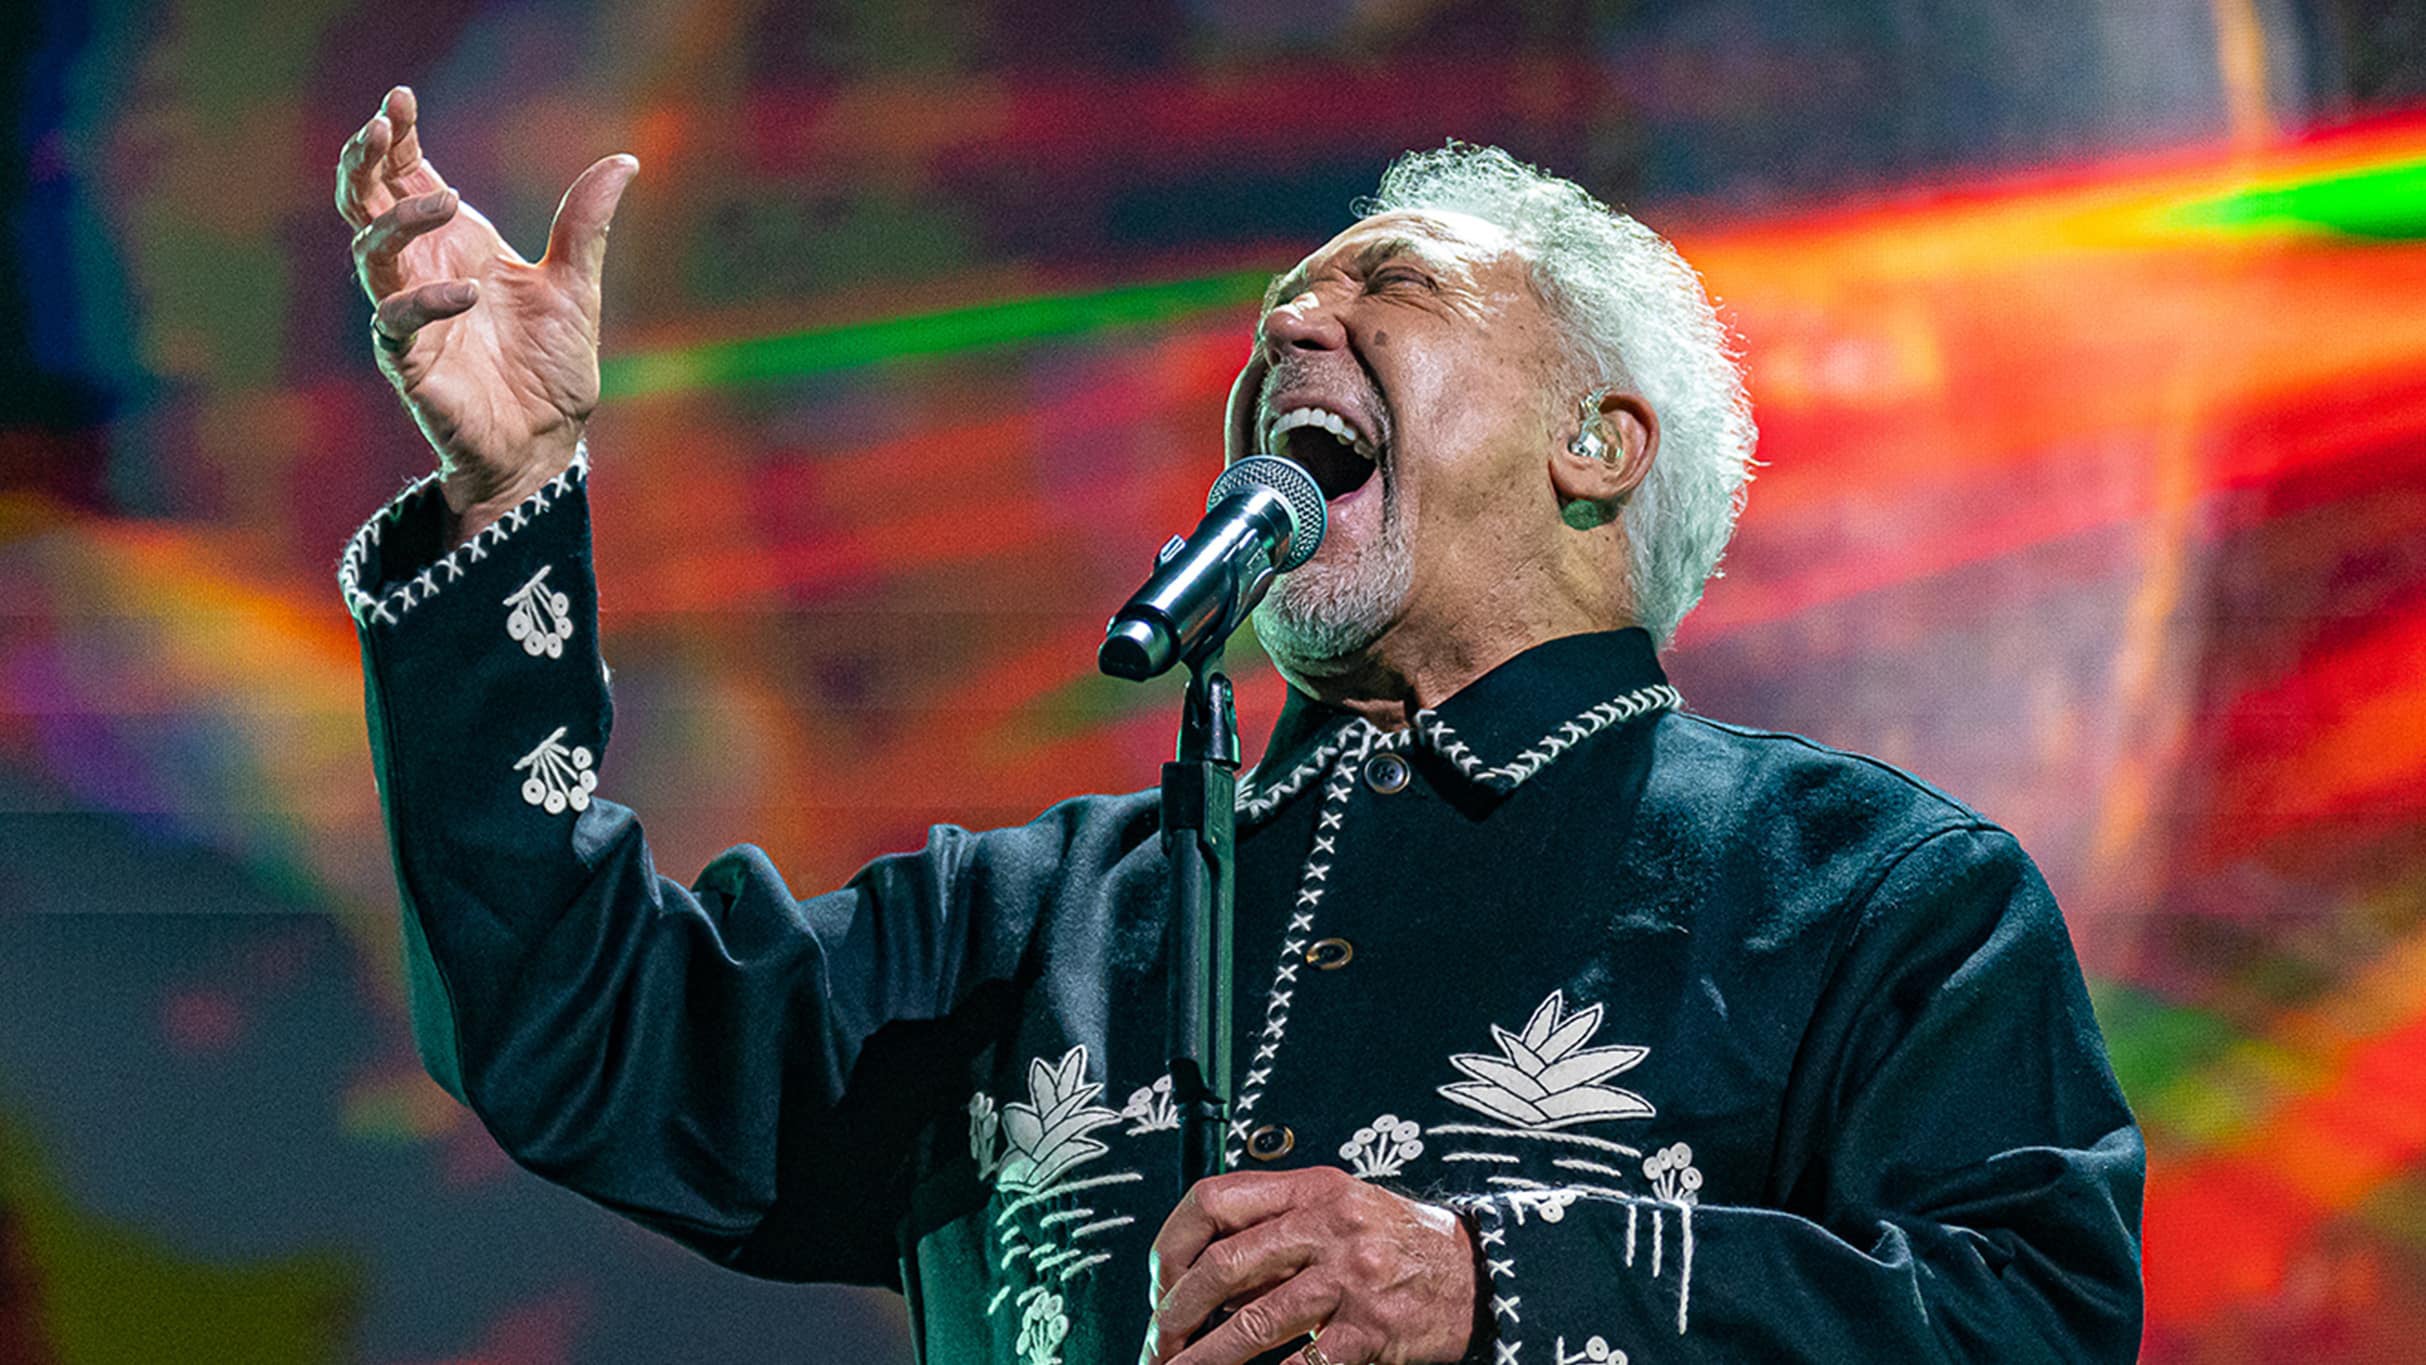 Image used with permission from Ticketmaster | Tom Jones - Ages & Stages Tour tickets